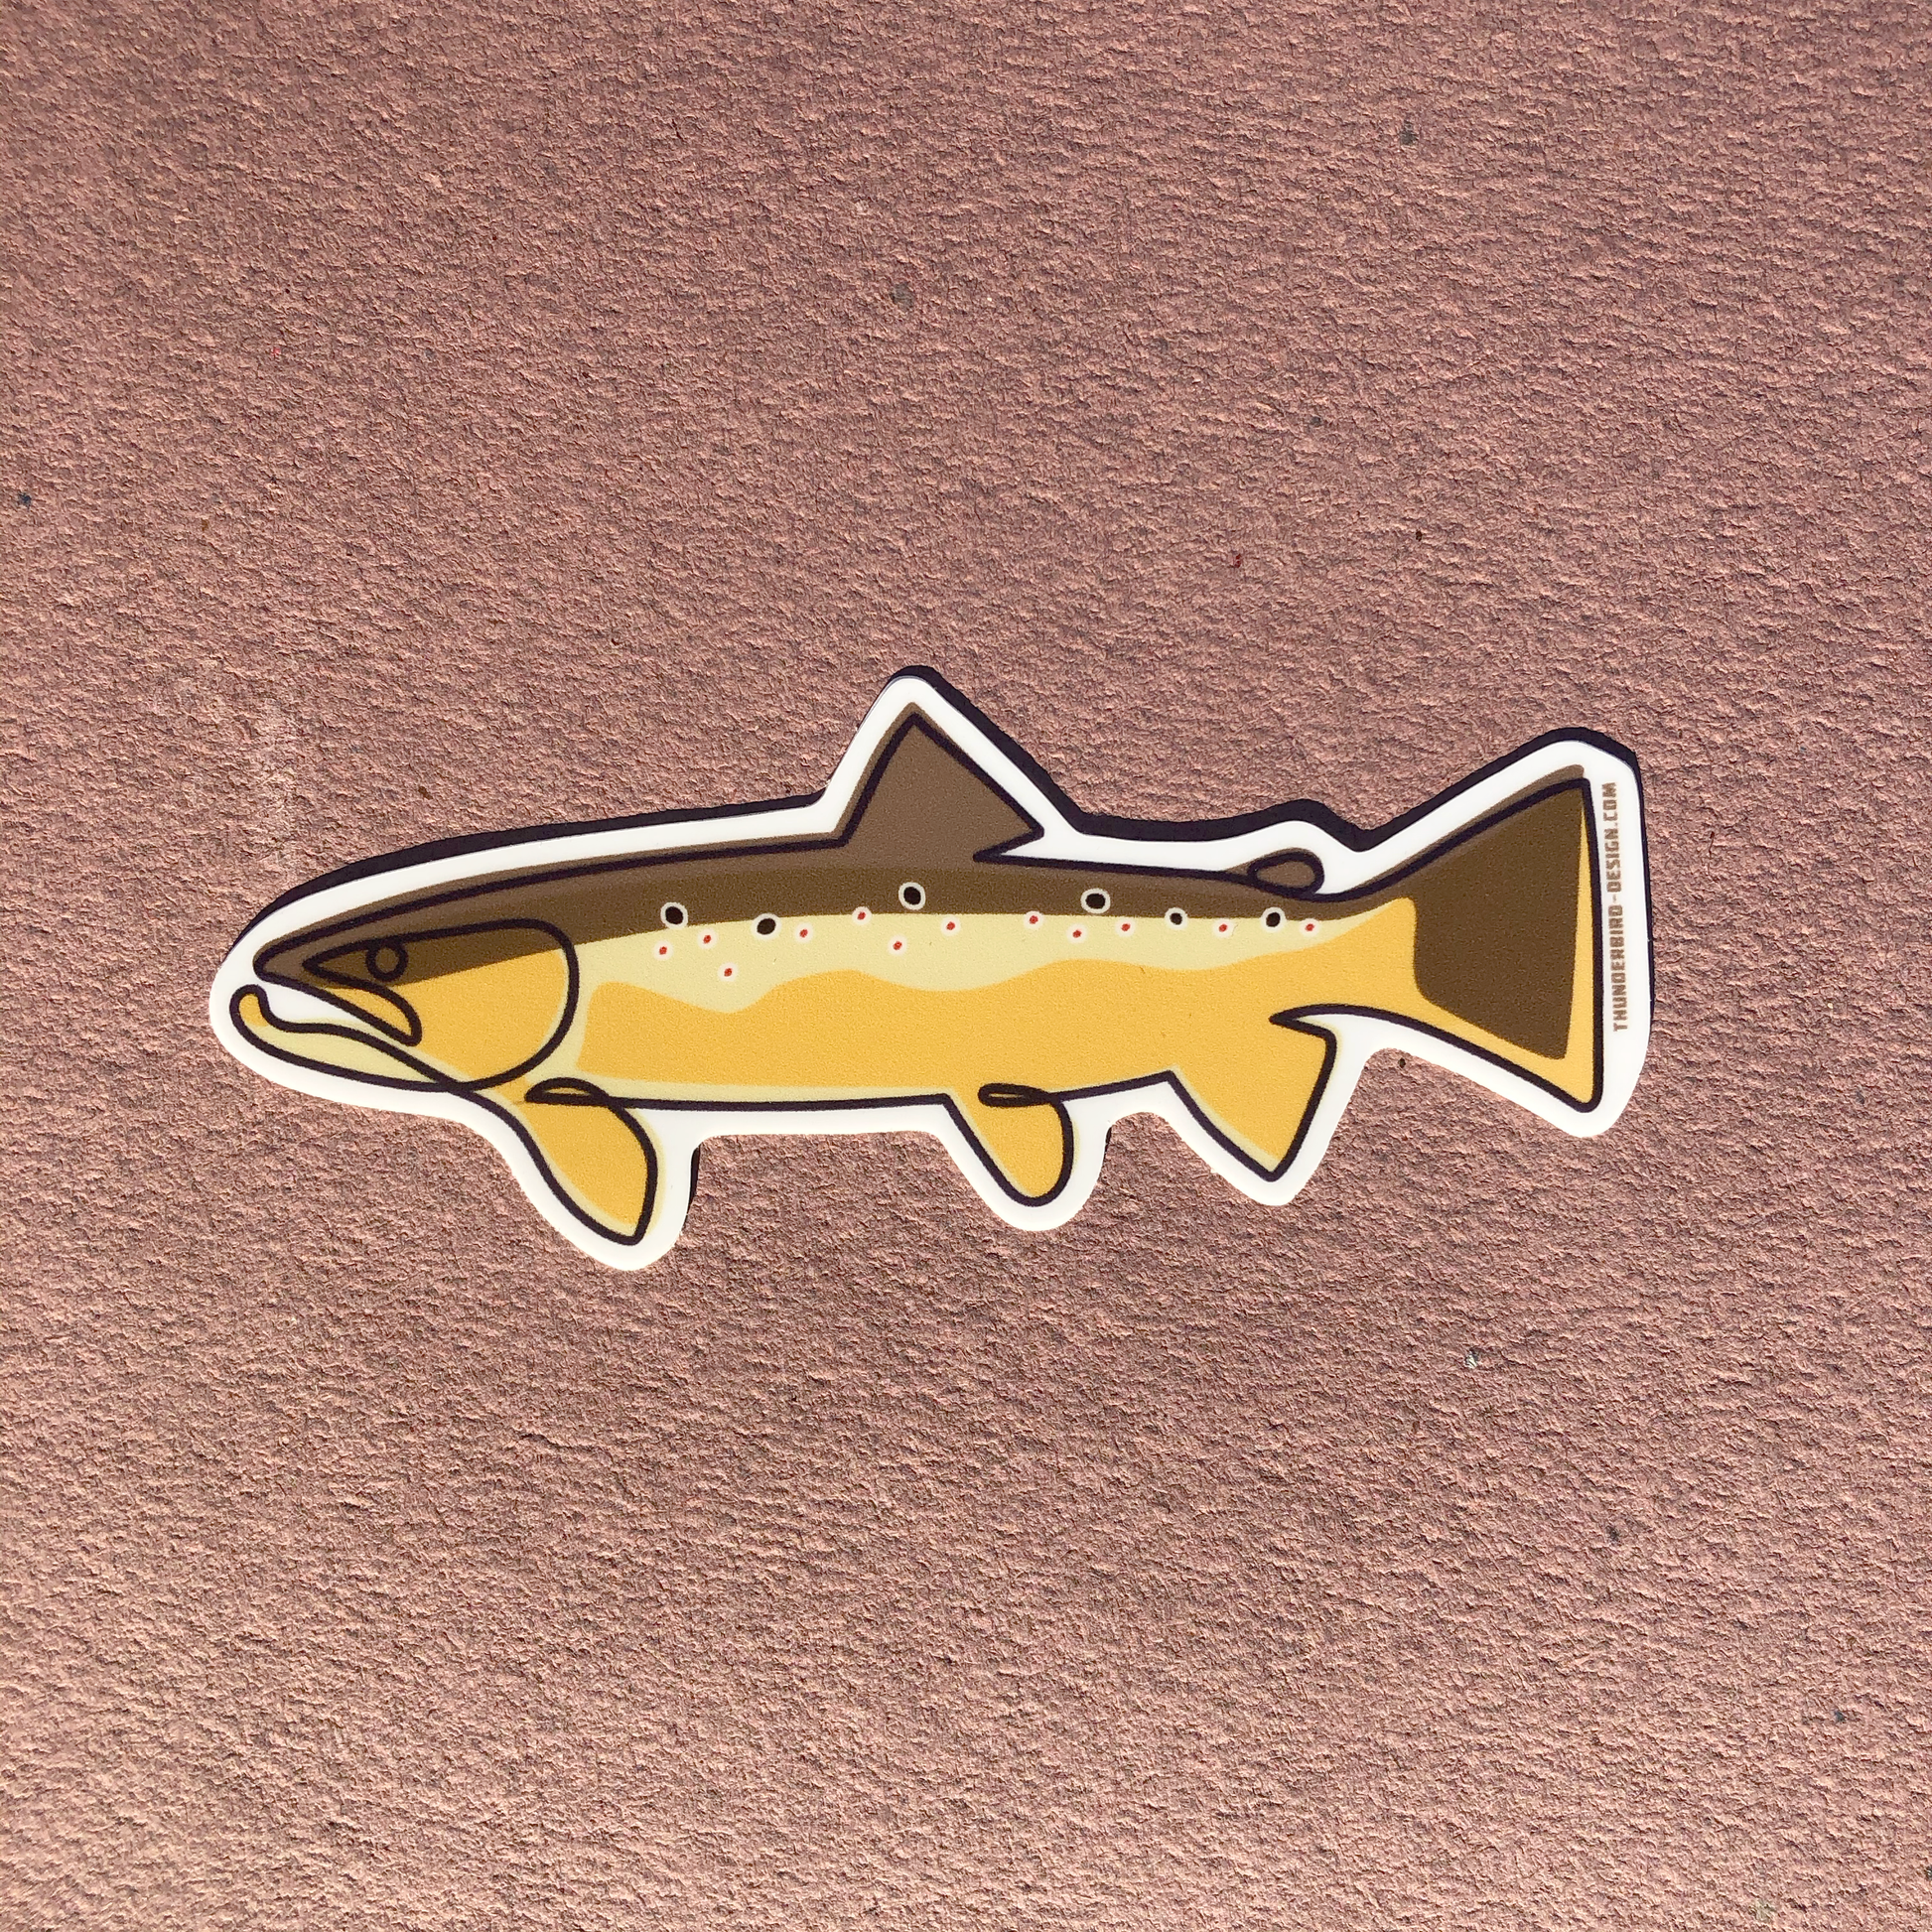 Thunderbird Outdoor SupplySingle Line Brown Trout | Matte DecalSingle Line Brown Trout
Drawn, Single Line Contour Illustration of a Brown Trout.These 4" weatherproof Matte decals are perfect for your Rod tube, water bottle, tackle box, car window or w